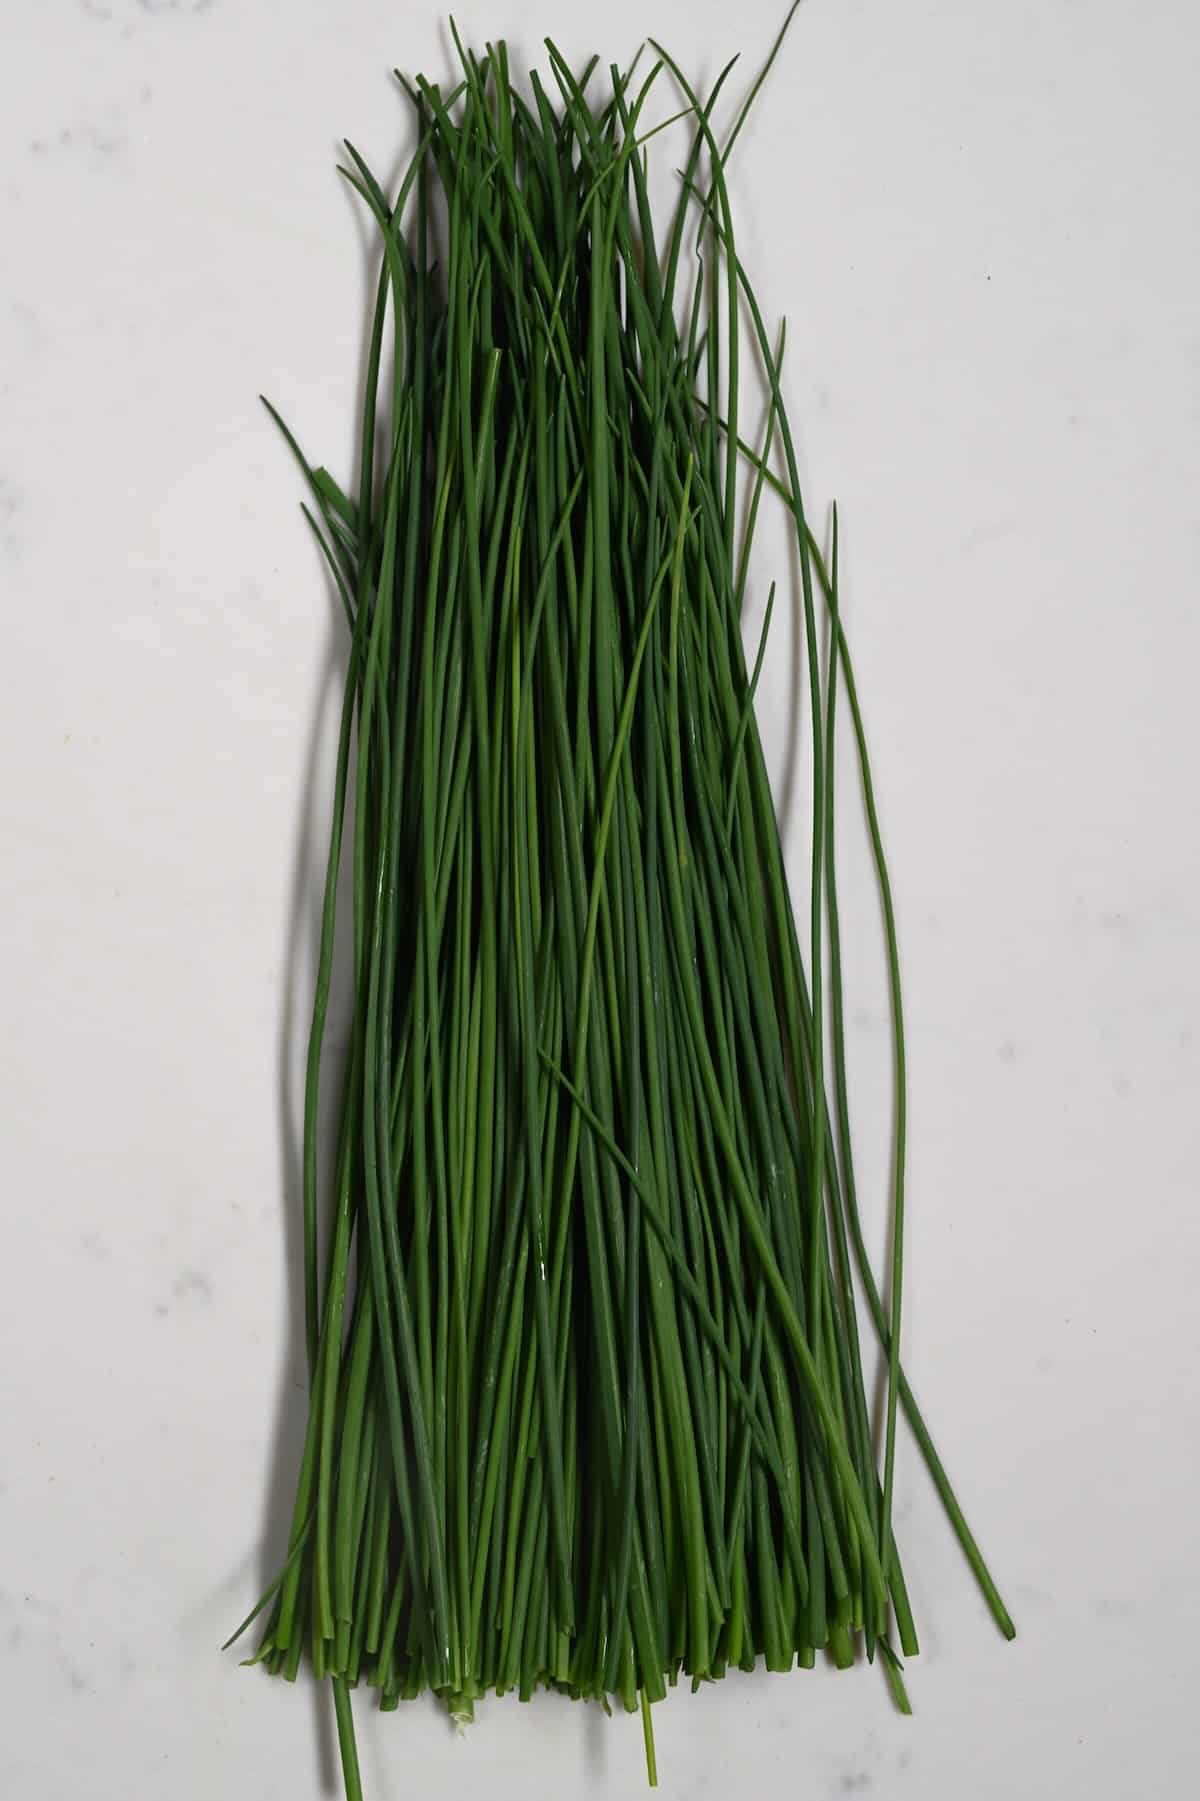 Chives on a flat surface